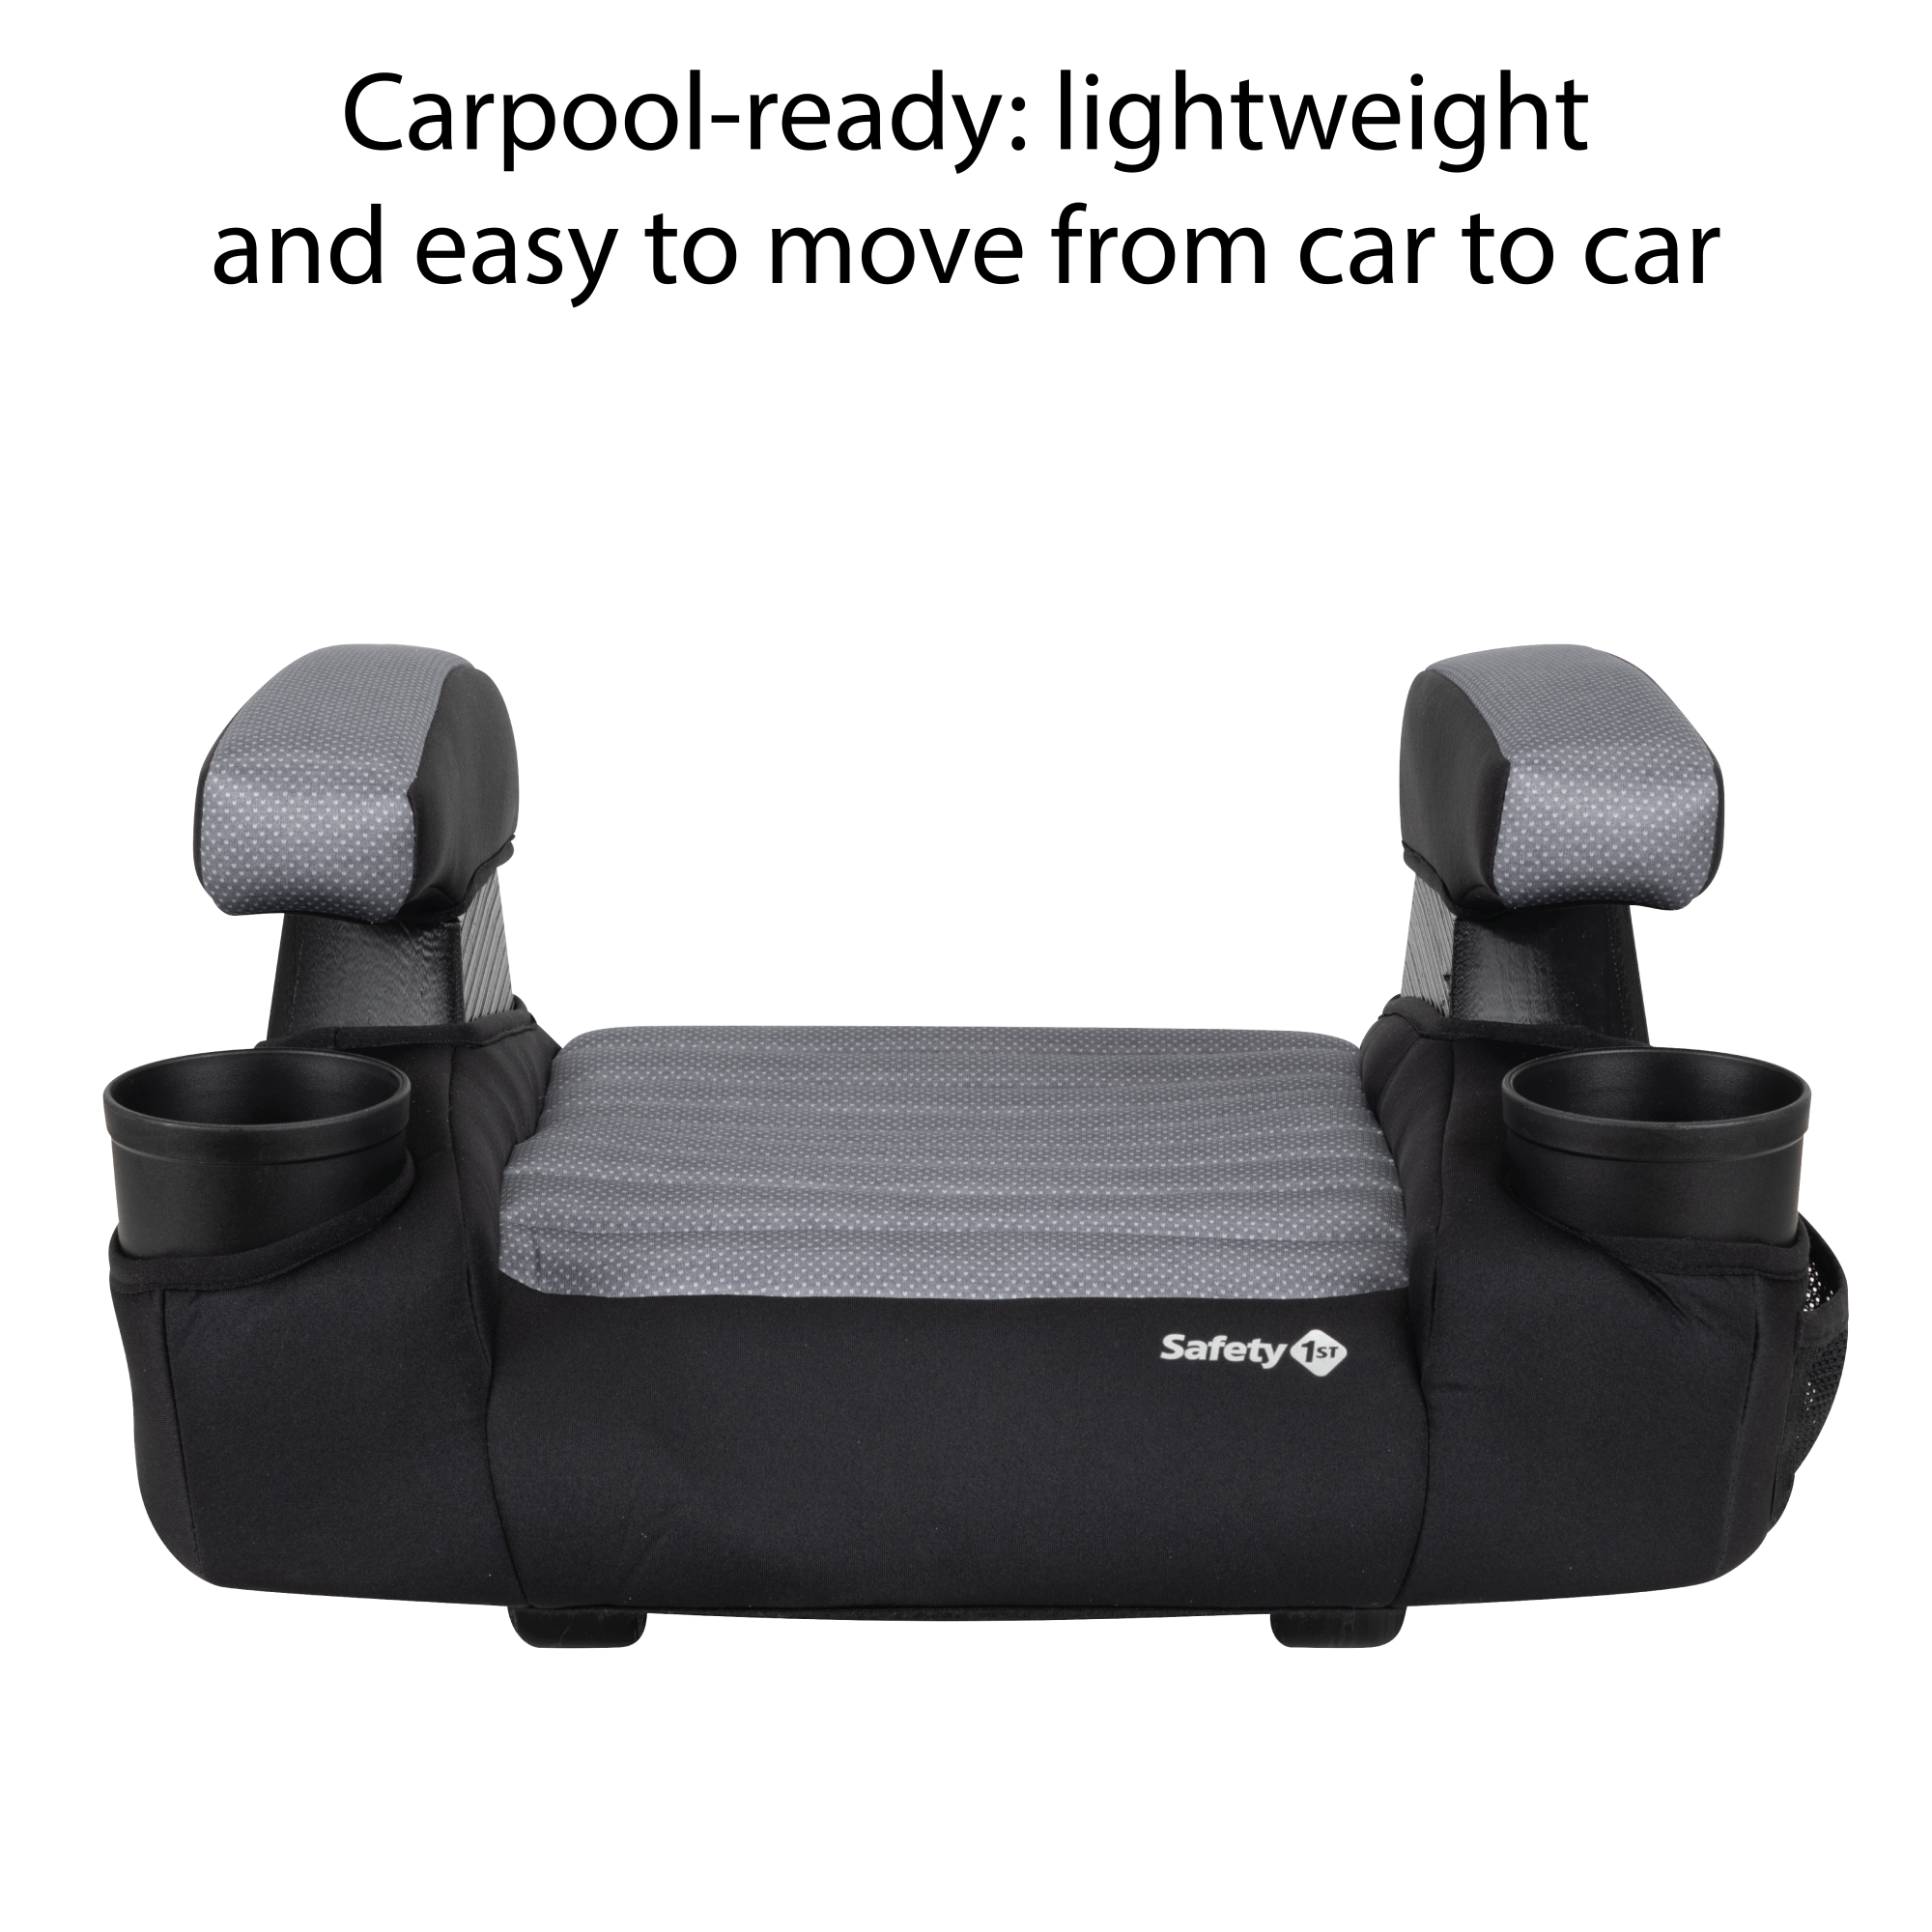 Boost-and-Go™ Lite Backless Booster - carpool-ready: lightweight and easy to move from car to car